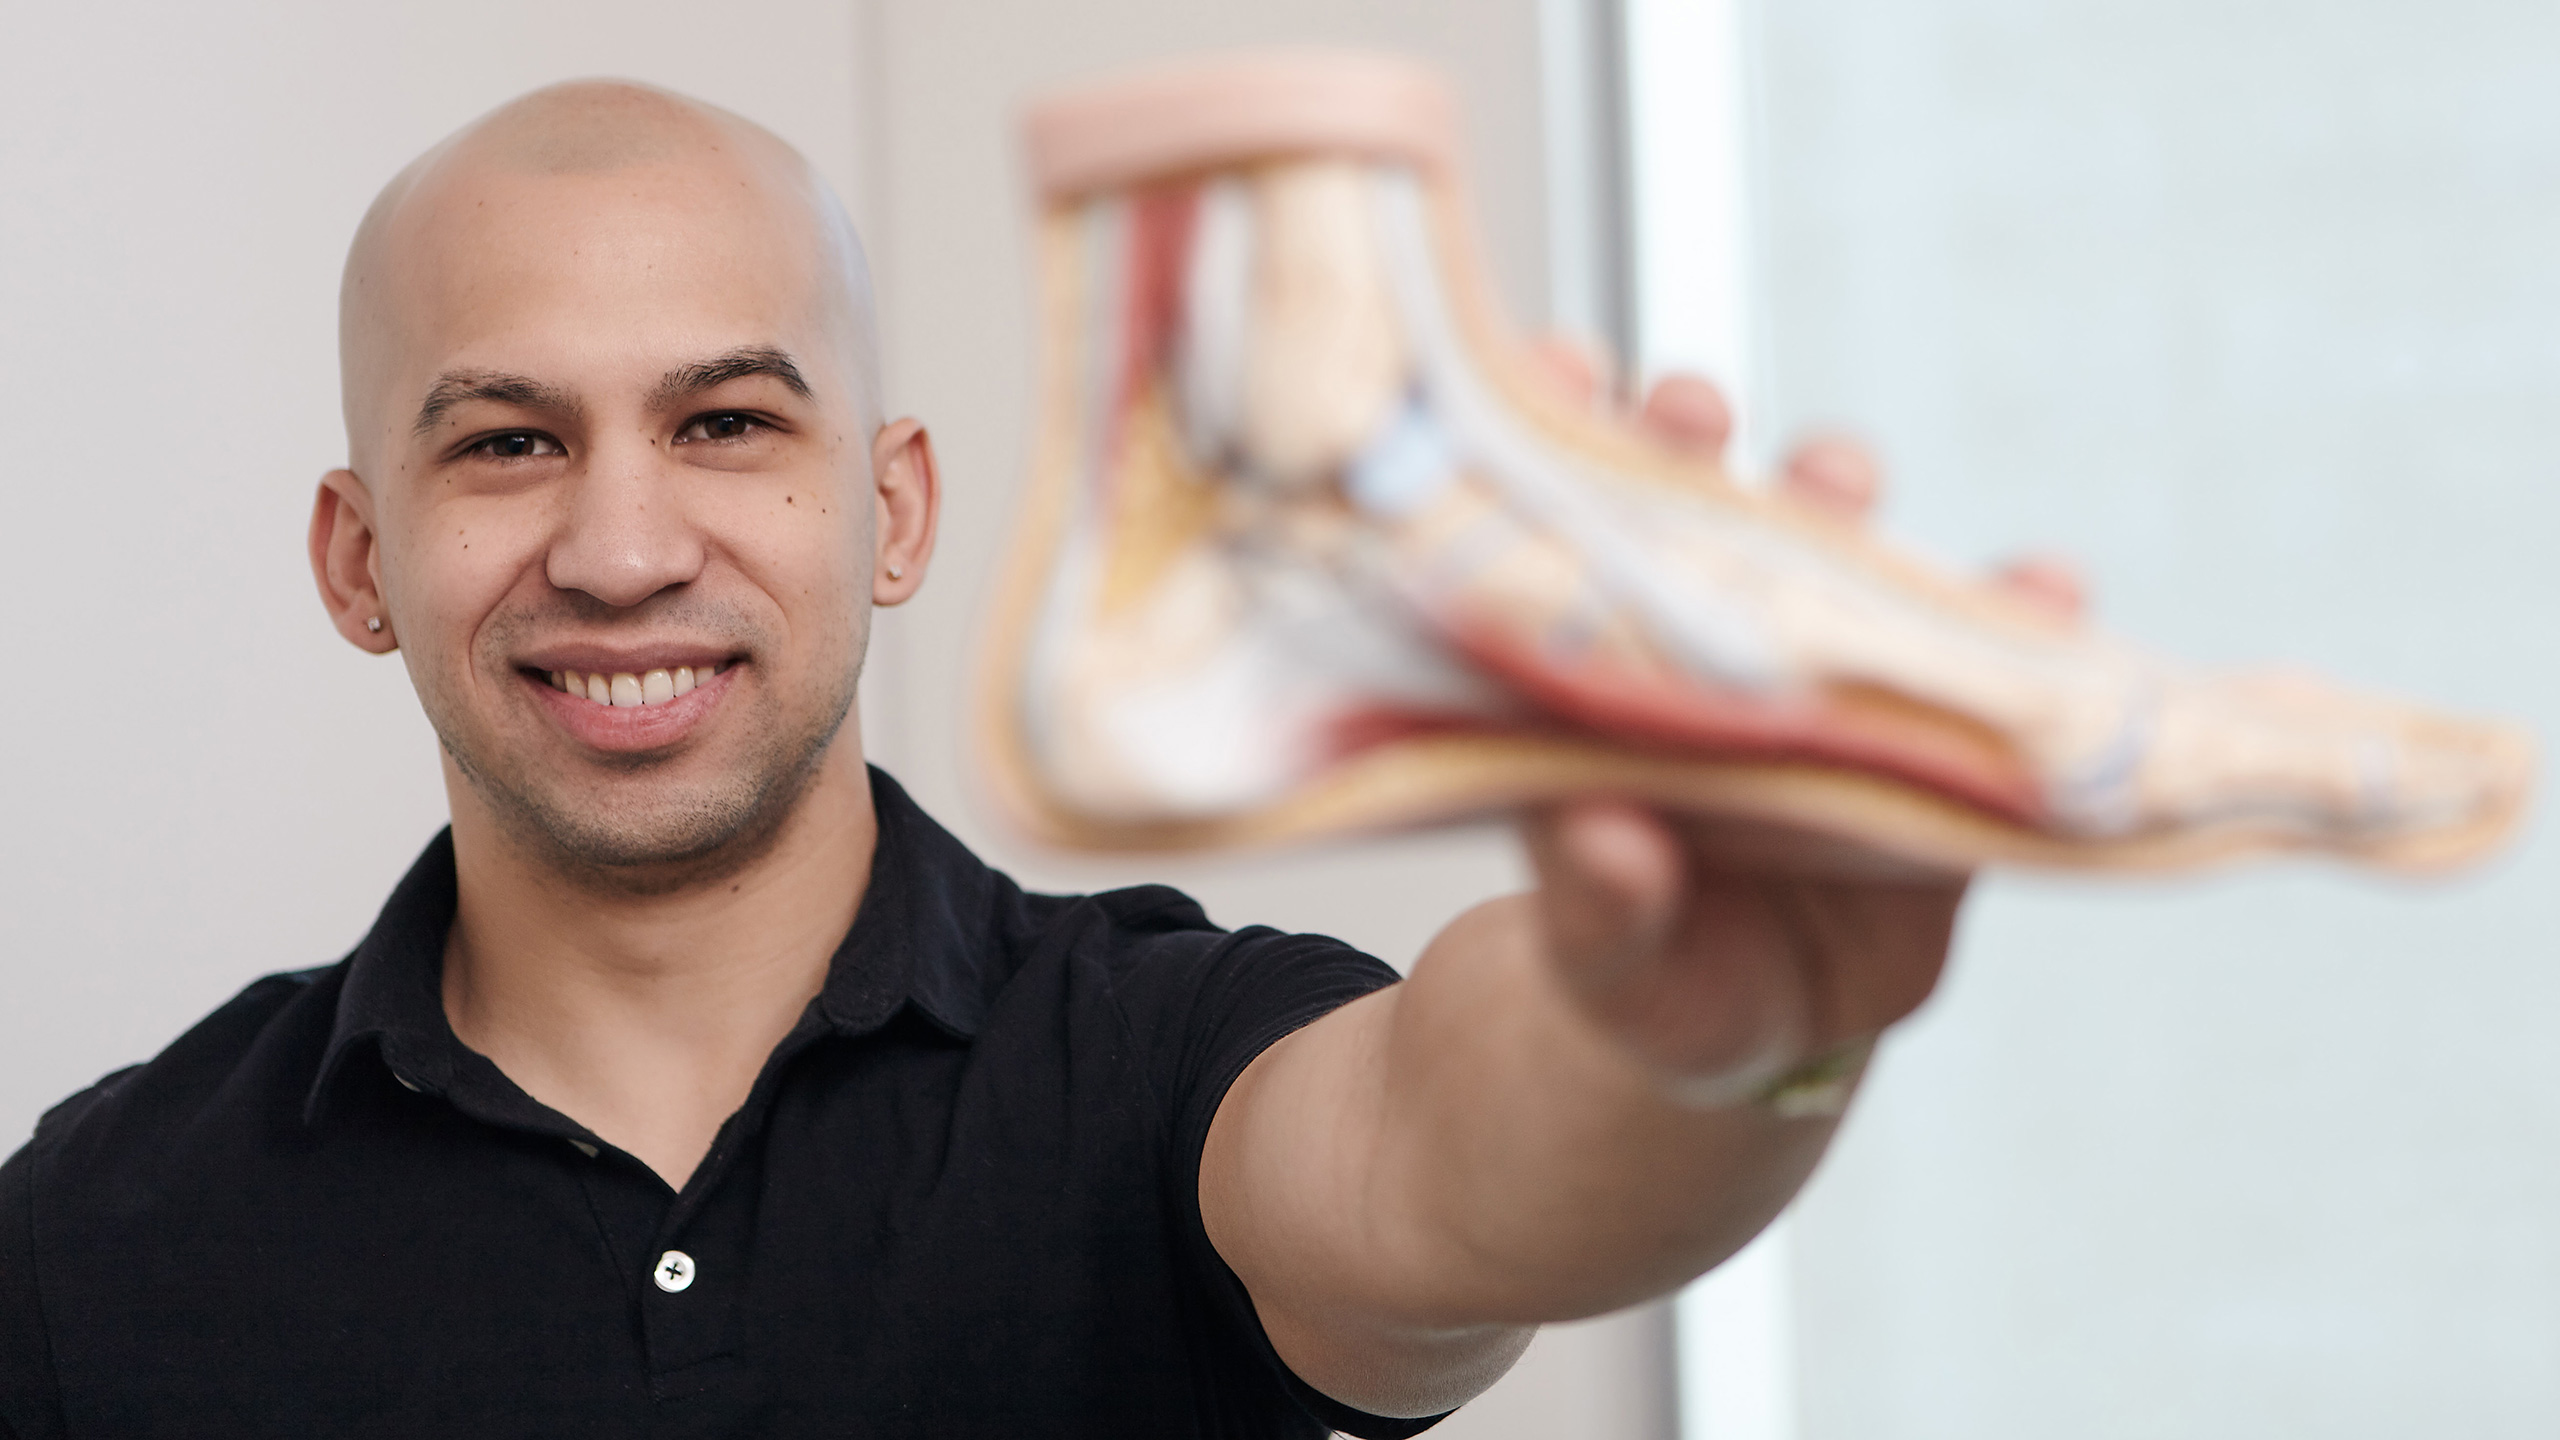 Jonathan Tomines holds up a model foot in his office.